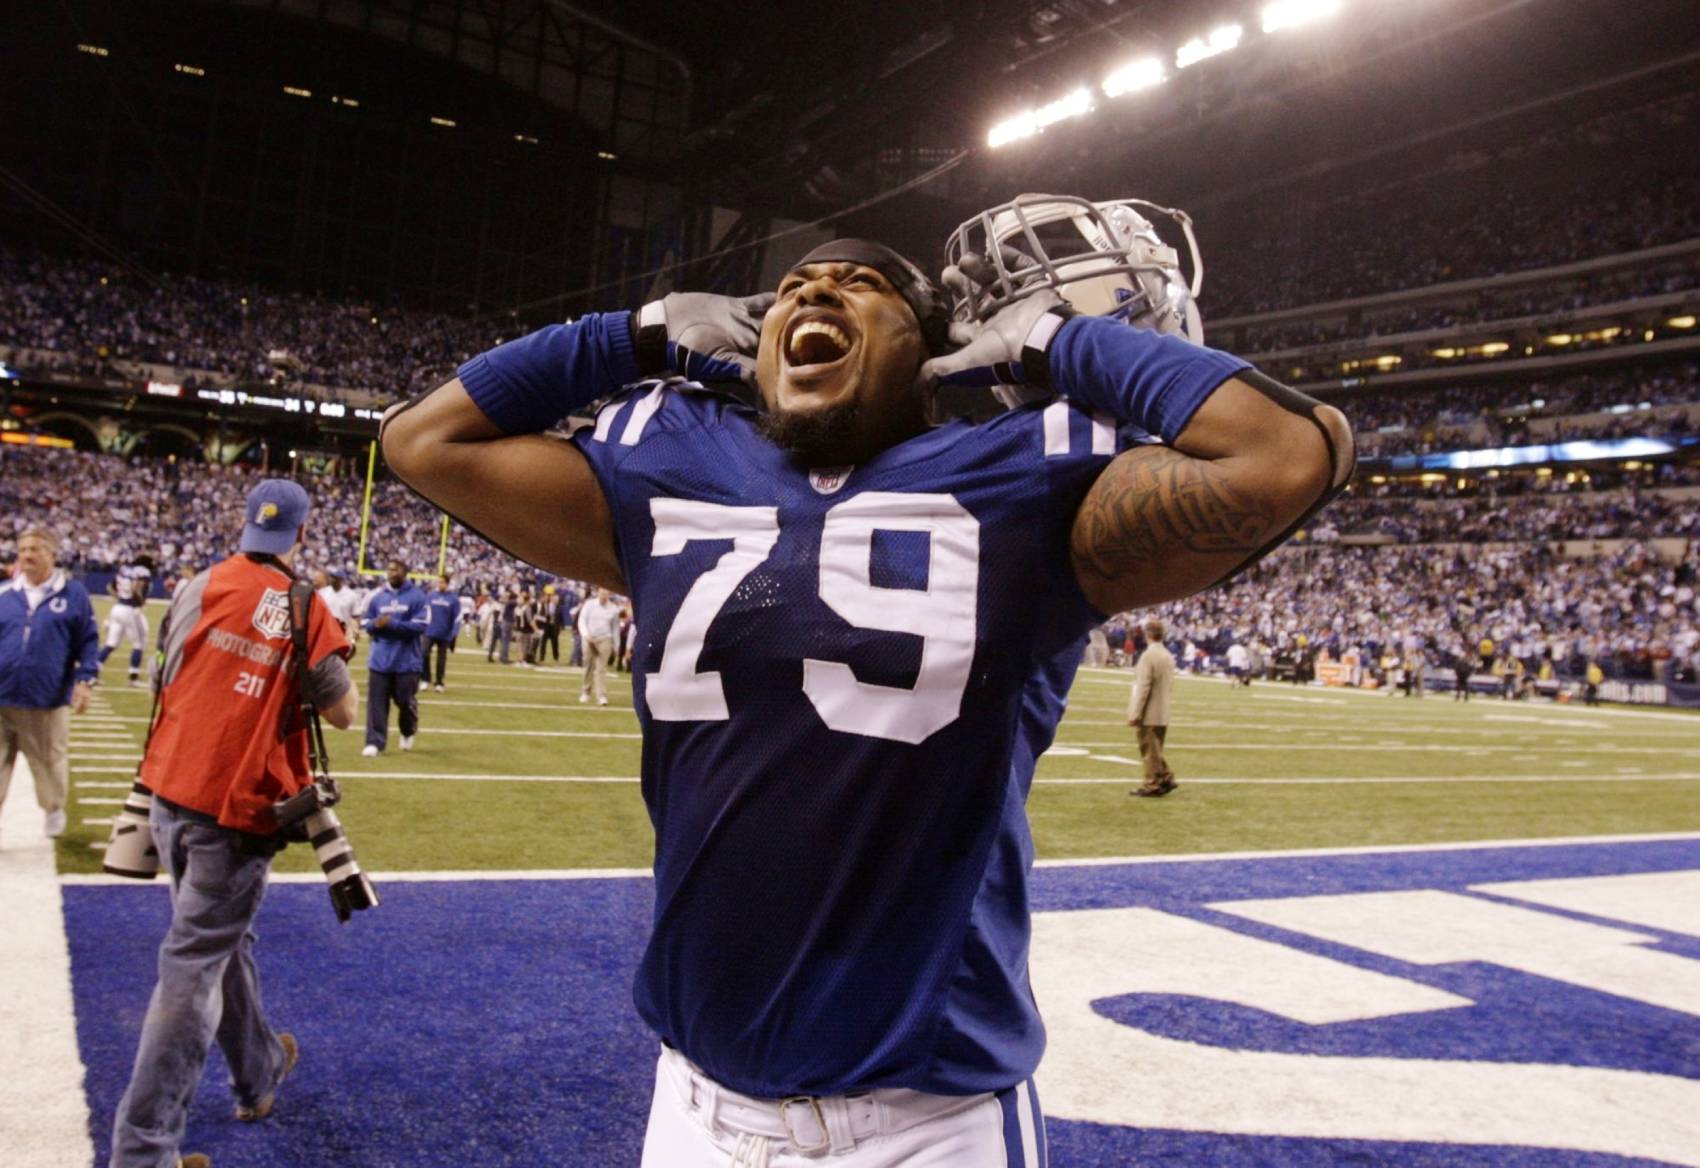 Raheem Brock won a Super Bowl with the Indianapolis Colts in 2007.